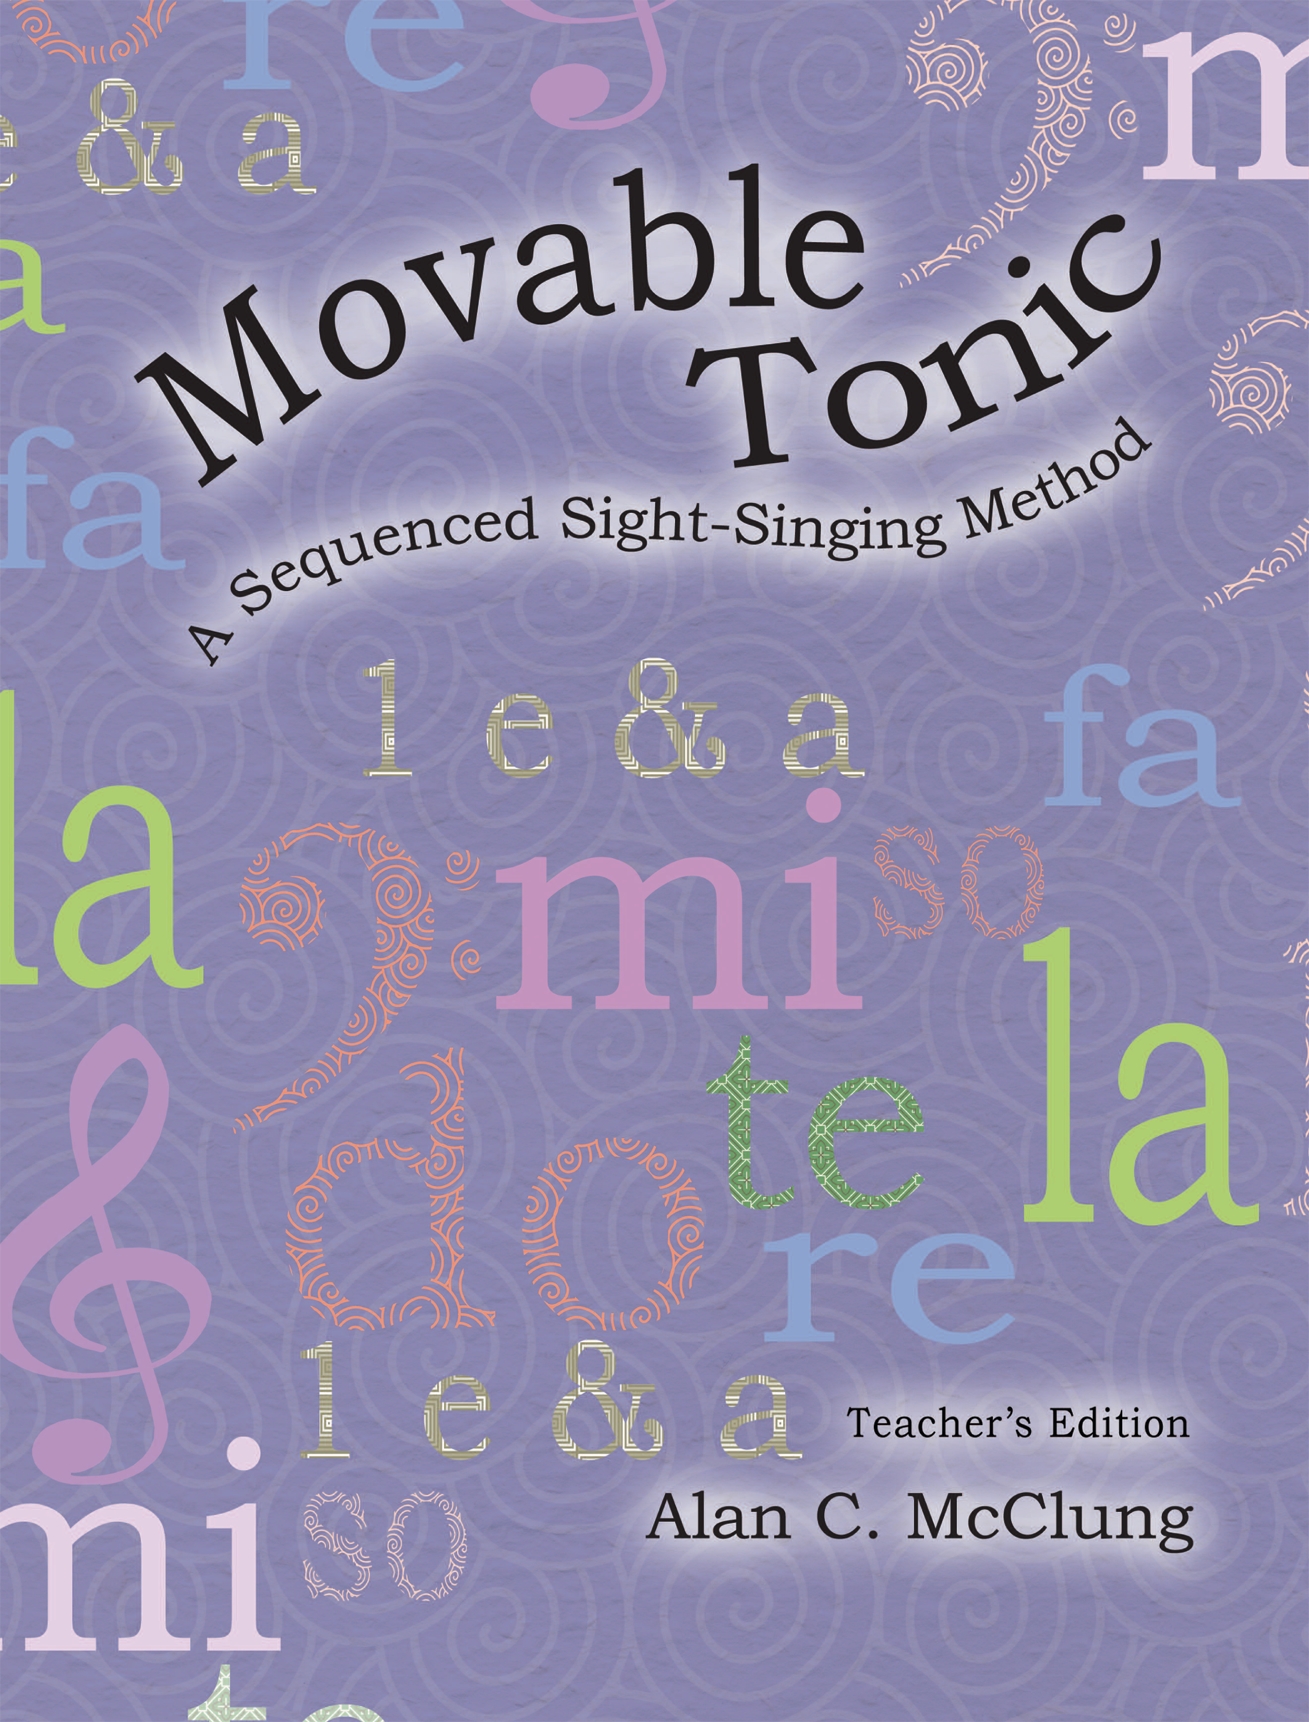 Movable Tonic: A Sequenced Sight-Singing Method Teacher's Edition